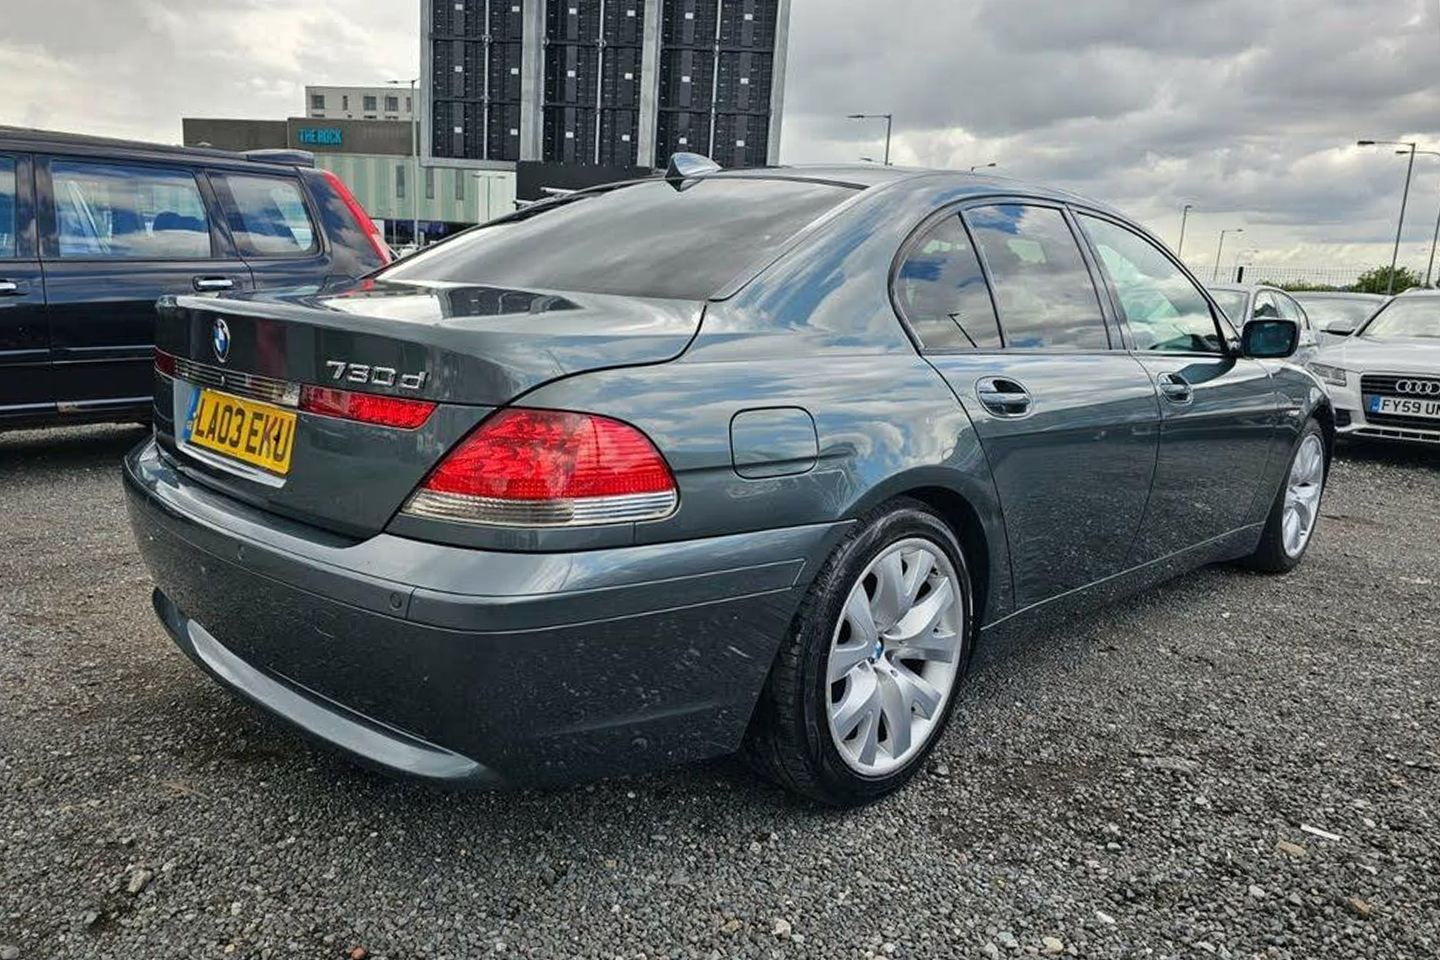 BMW 730d (E65)  Shed of the Week - PistonHeads UK